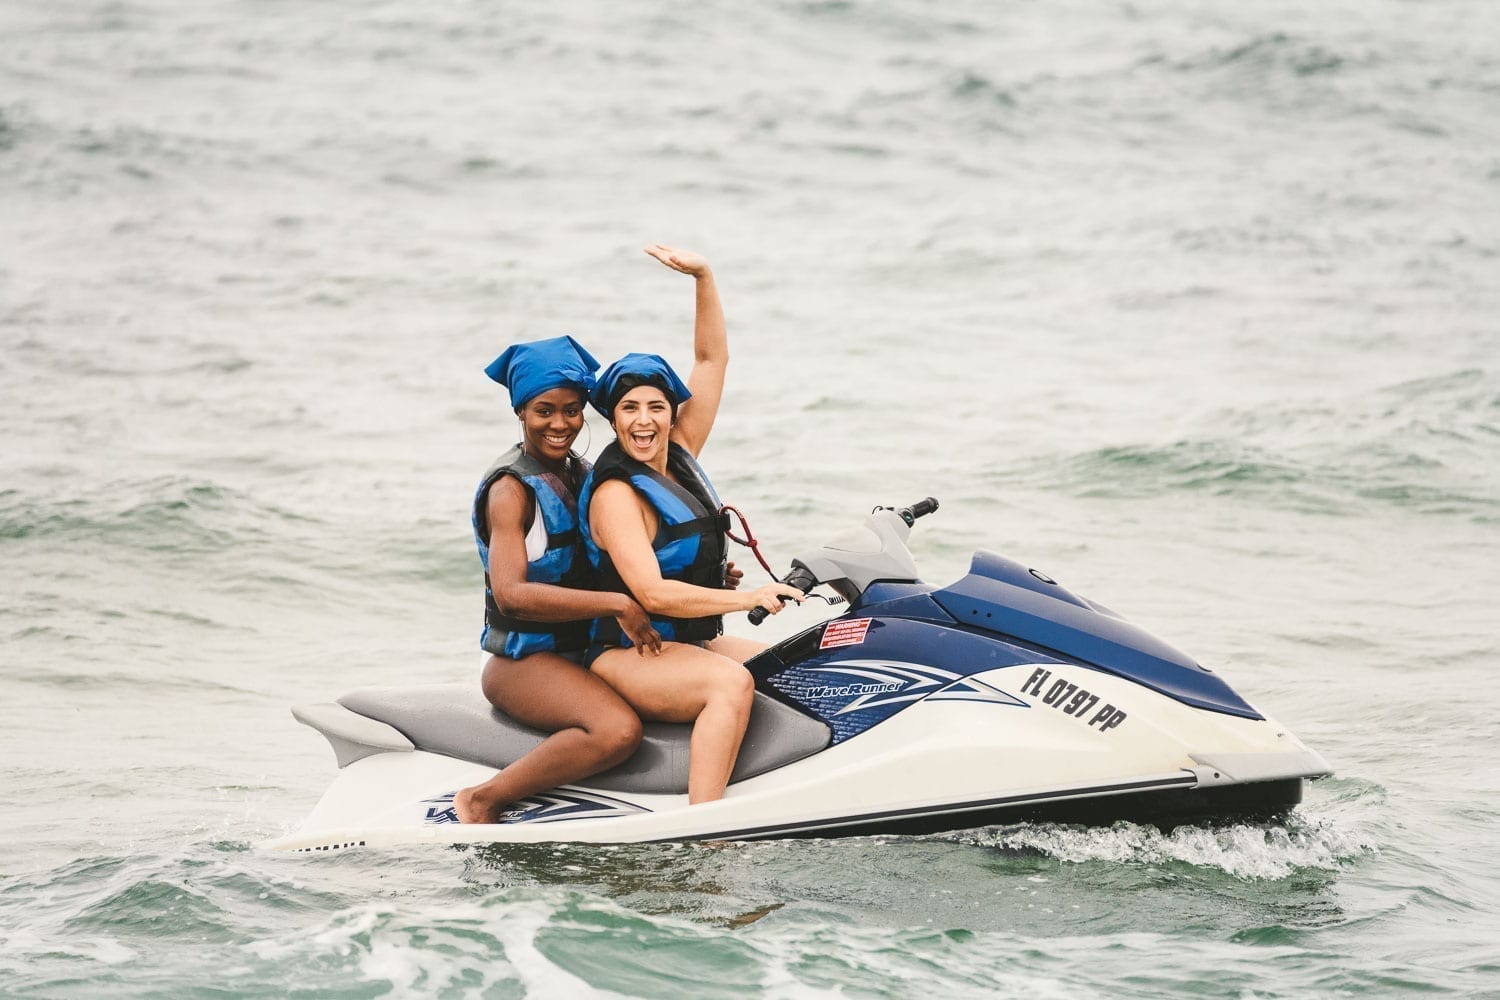 Two women with one African American wearing black and blue life vests and head covering cruising along on a jet ski smiling